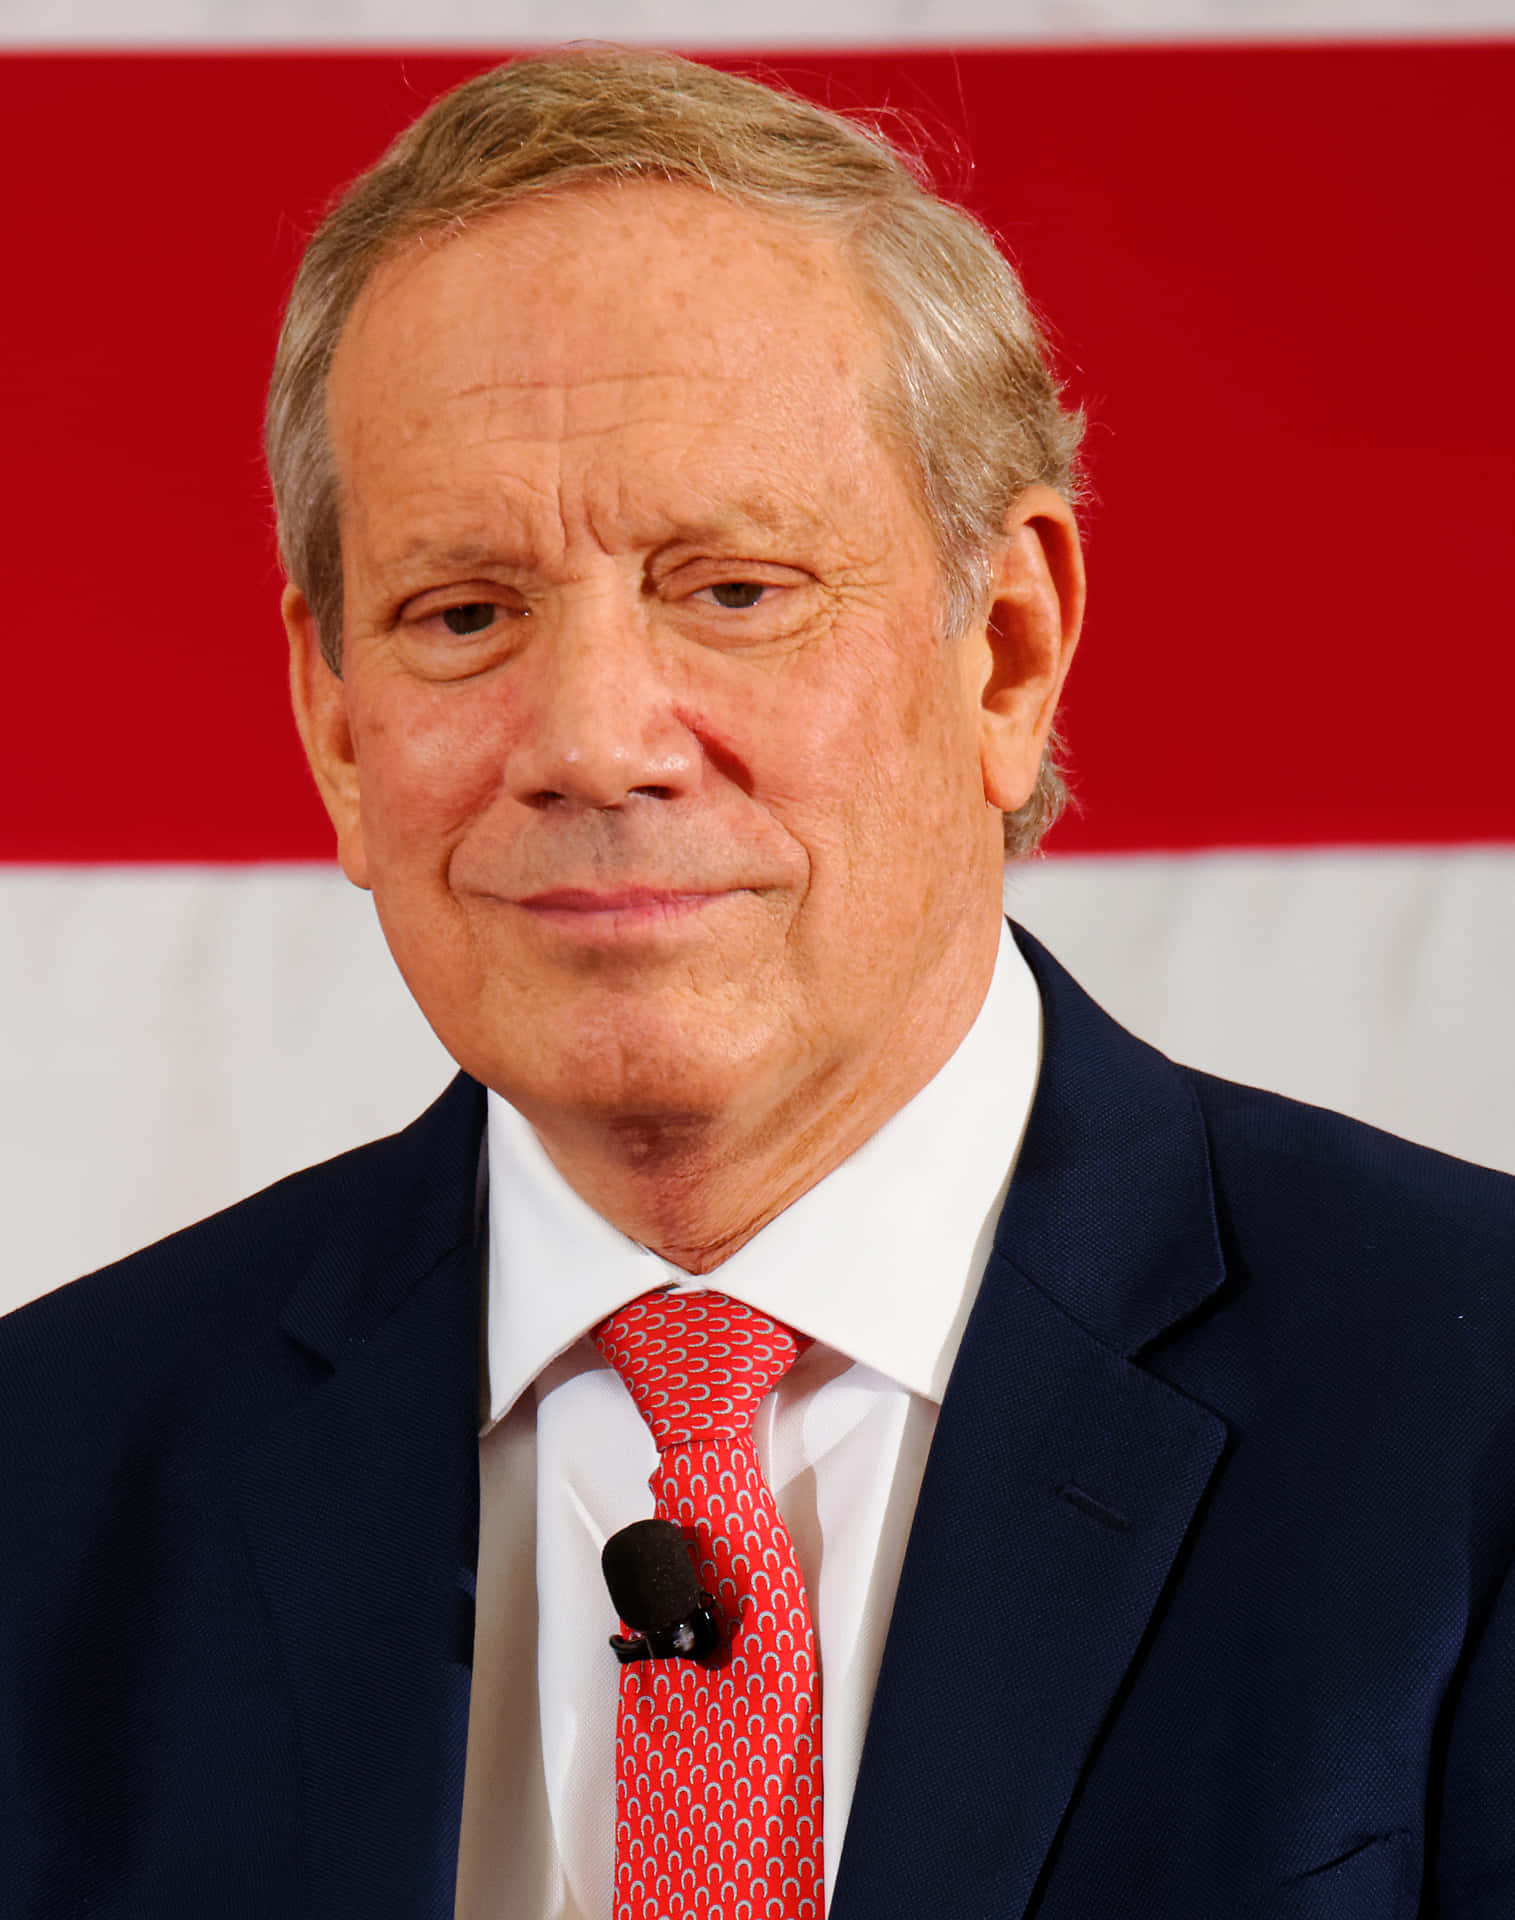 Download Suit And Tie Of George Pataki Wallpaper | Wallpapers.com